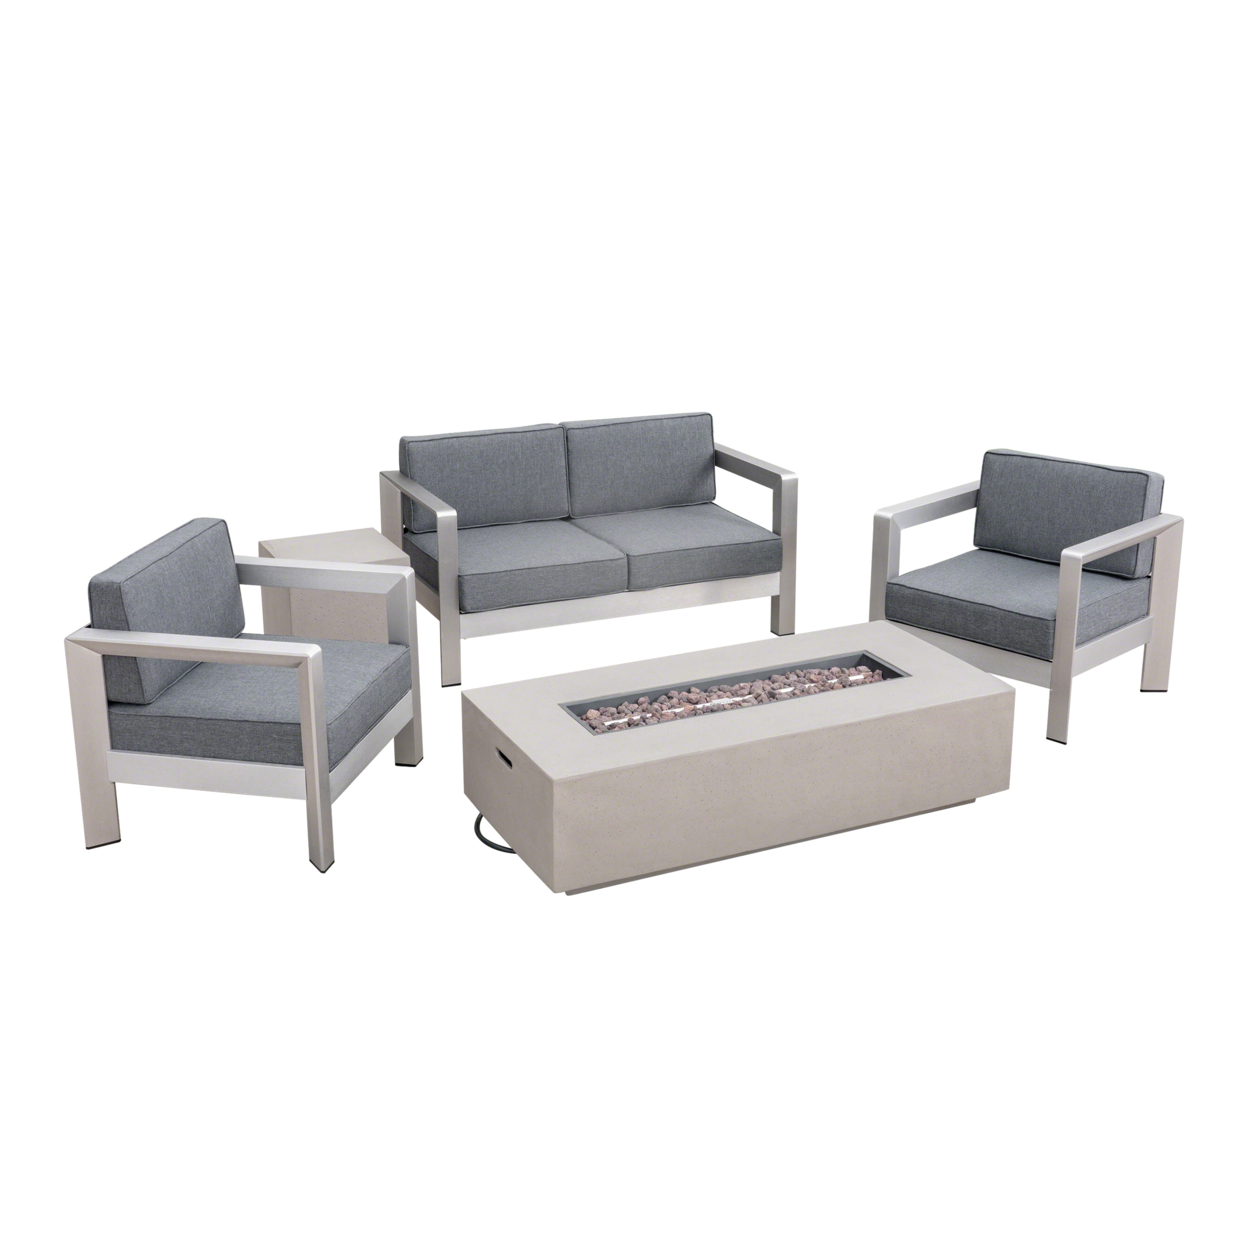 Pony Outdoor 4-Seater Aluminum Chat Set With Fire Pit And Tank Holder - Silver + Dark Gray + Dark Gray